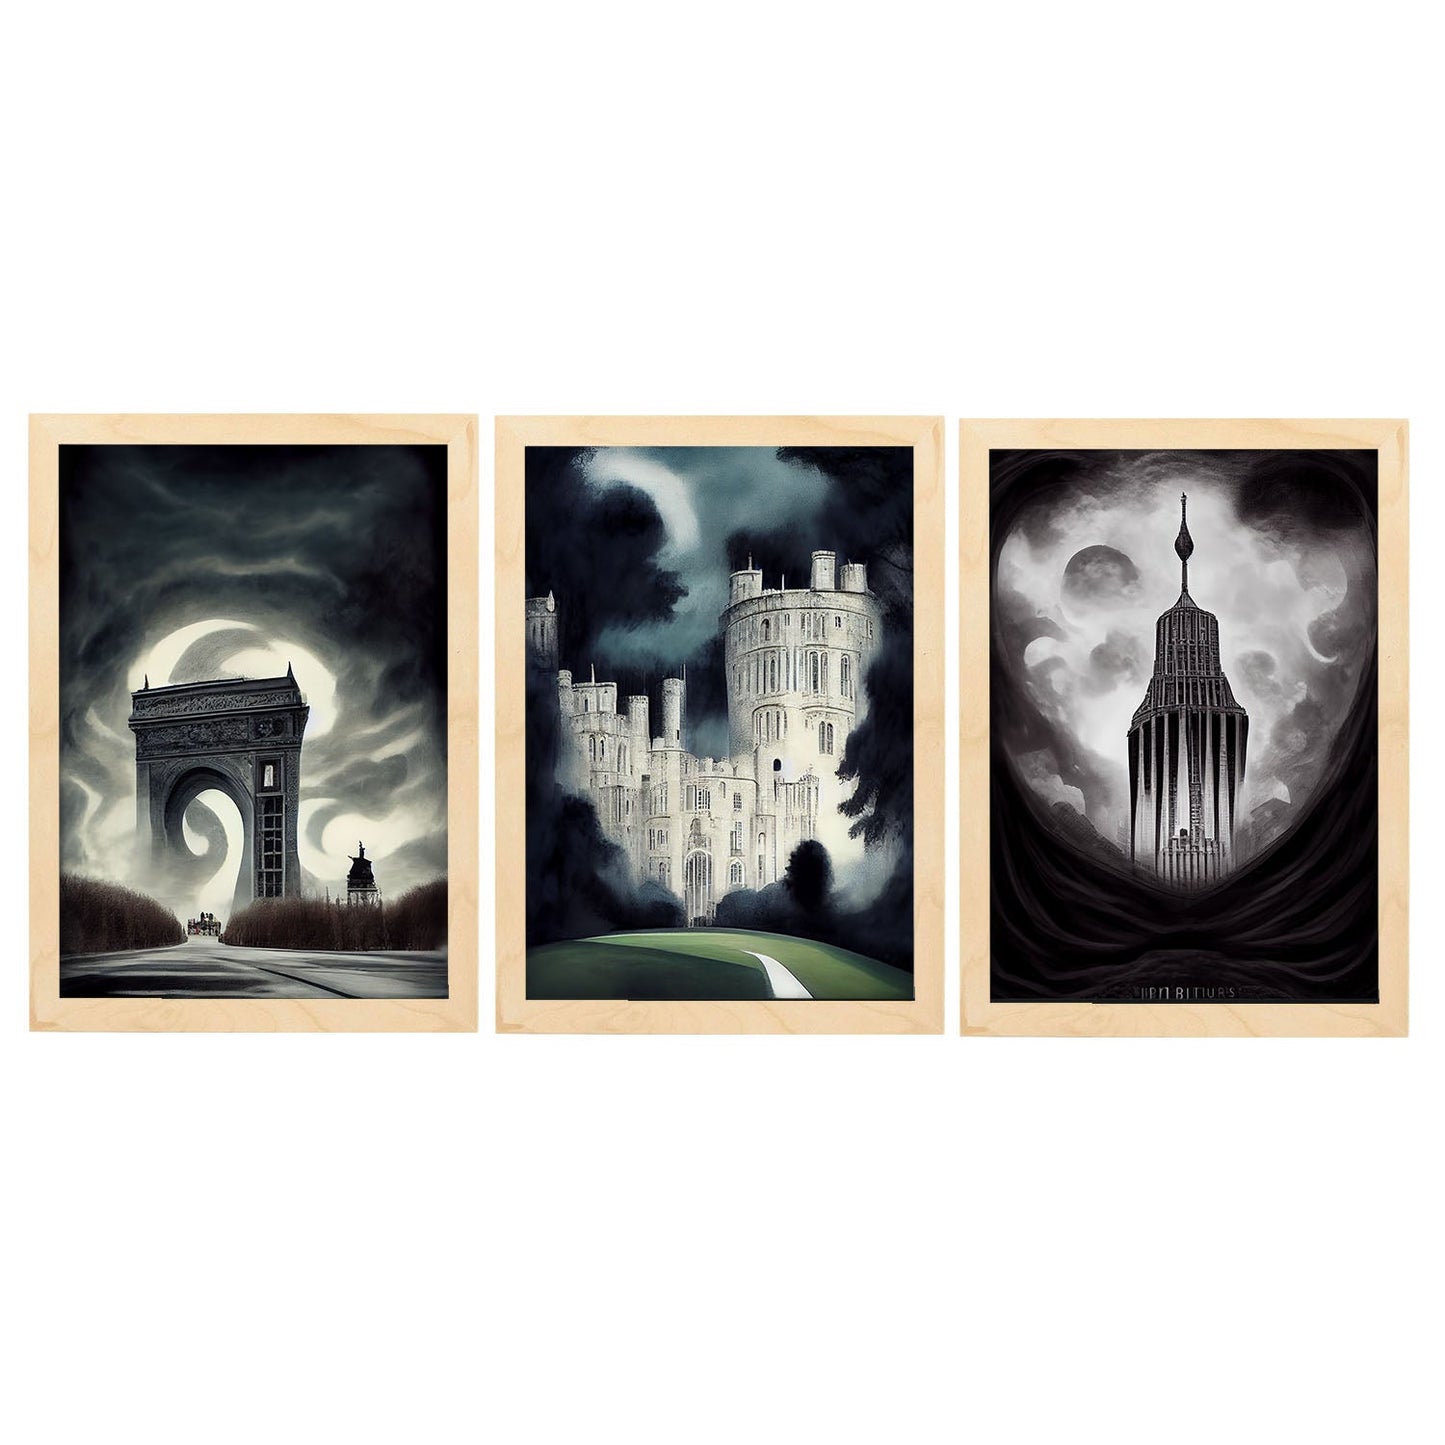 Burton style Illustrations of monuments and cities inspired by Burton's Dark and Goth art Interior Design and Decoration Set Collection 2-Artwork-Nacnic-A4-Marco Madera clara-Nacnic Estudio SL